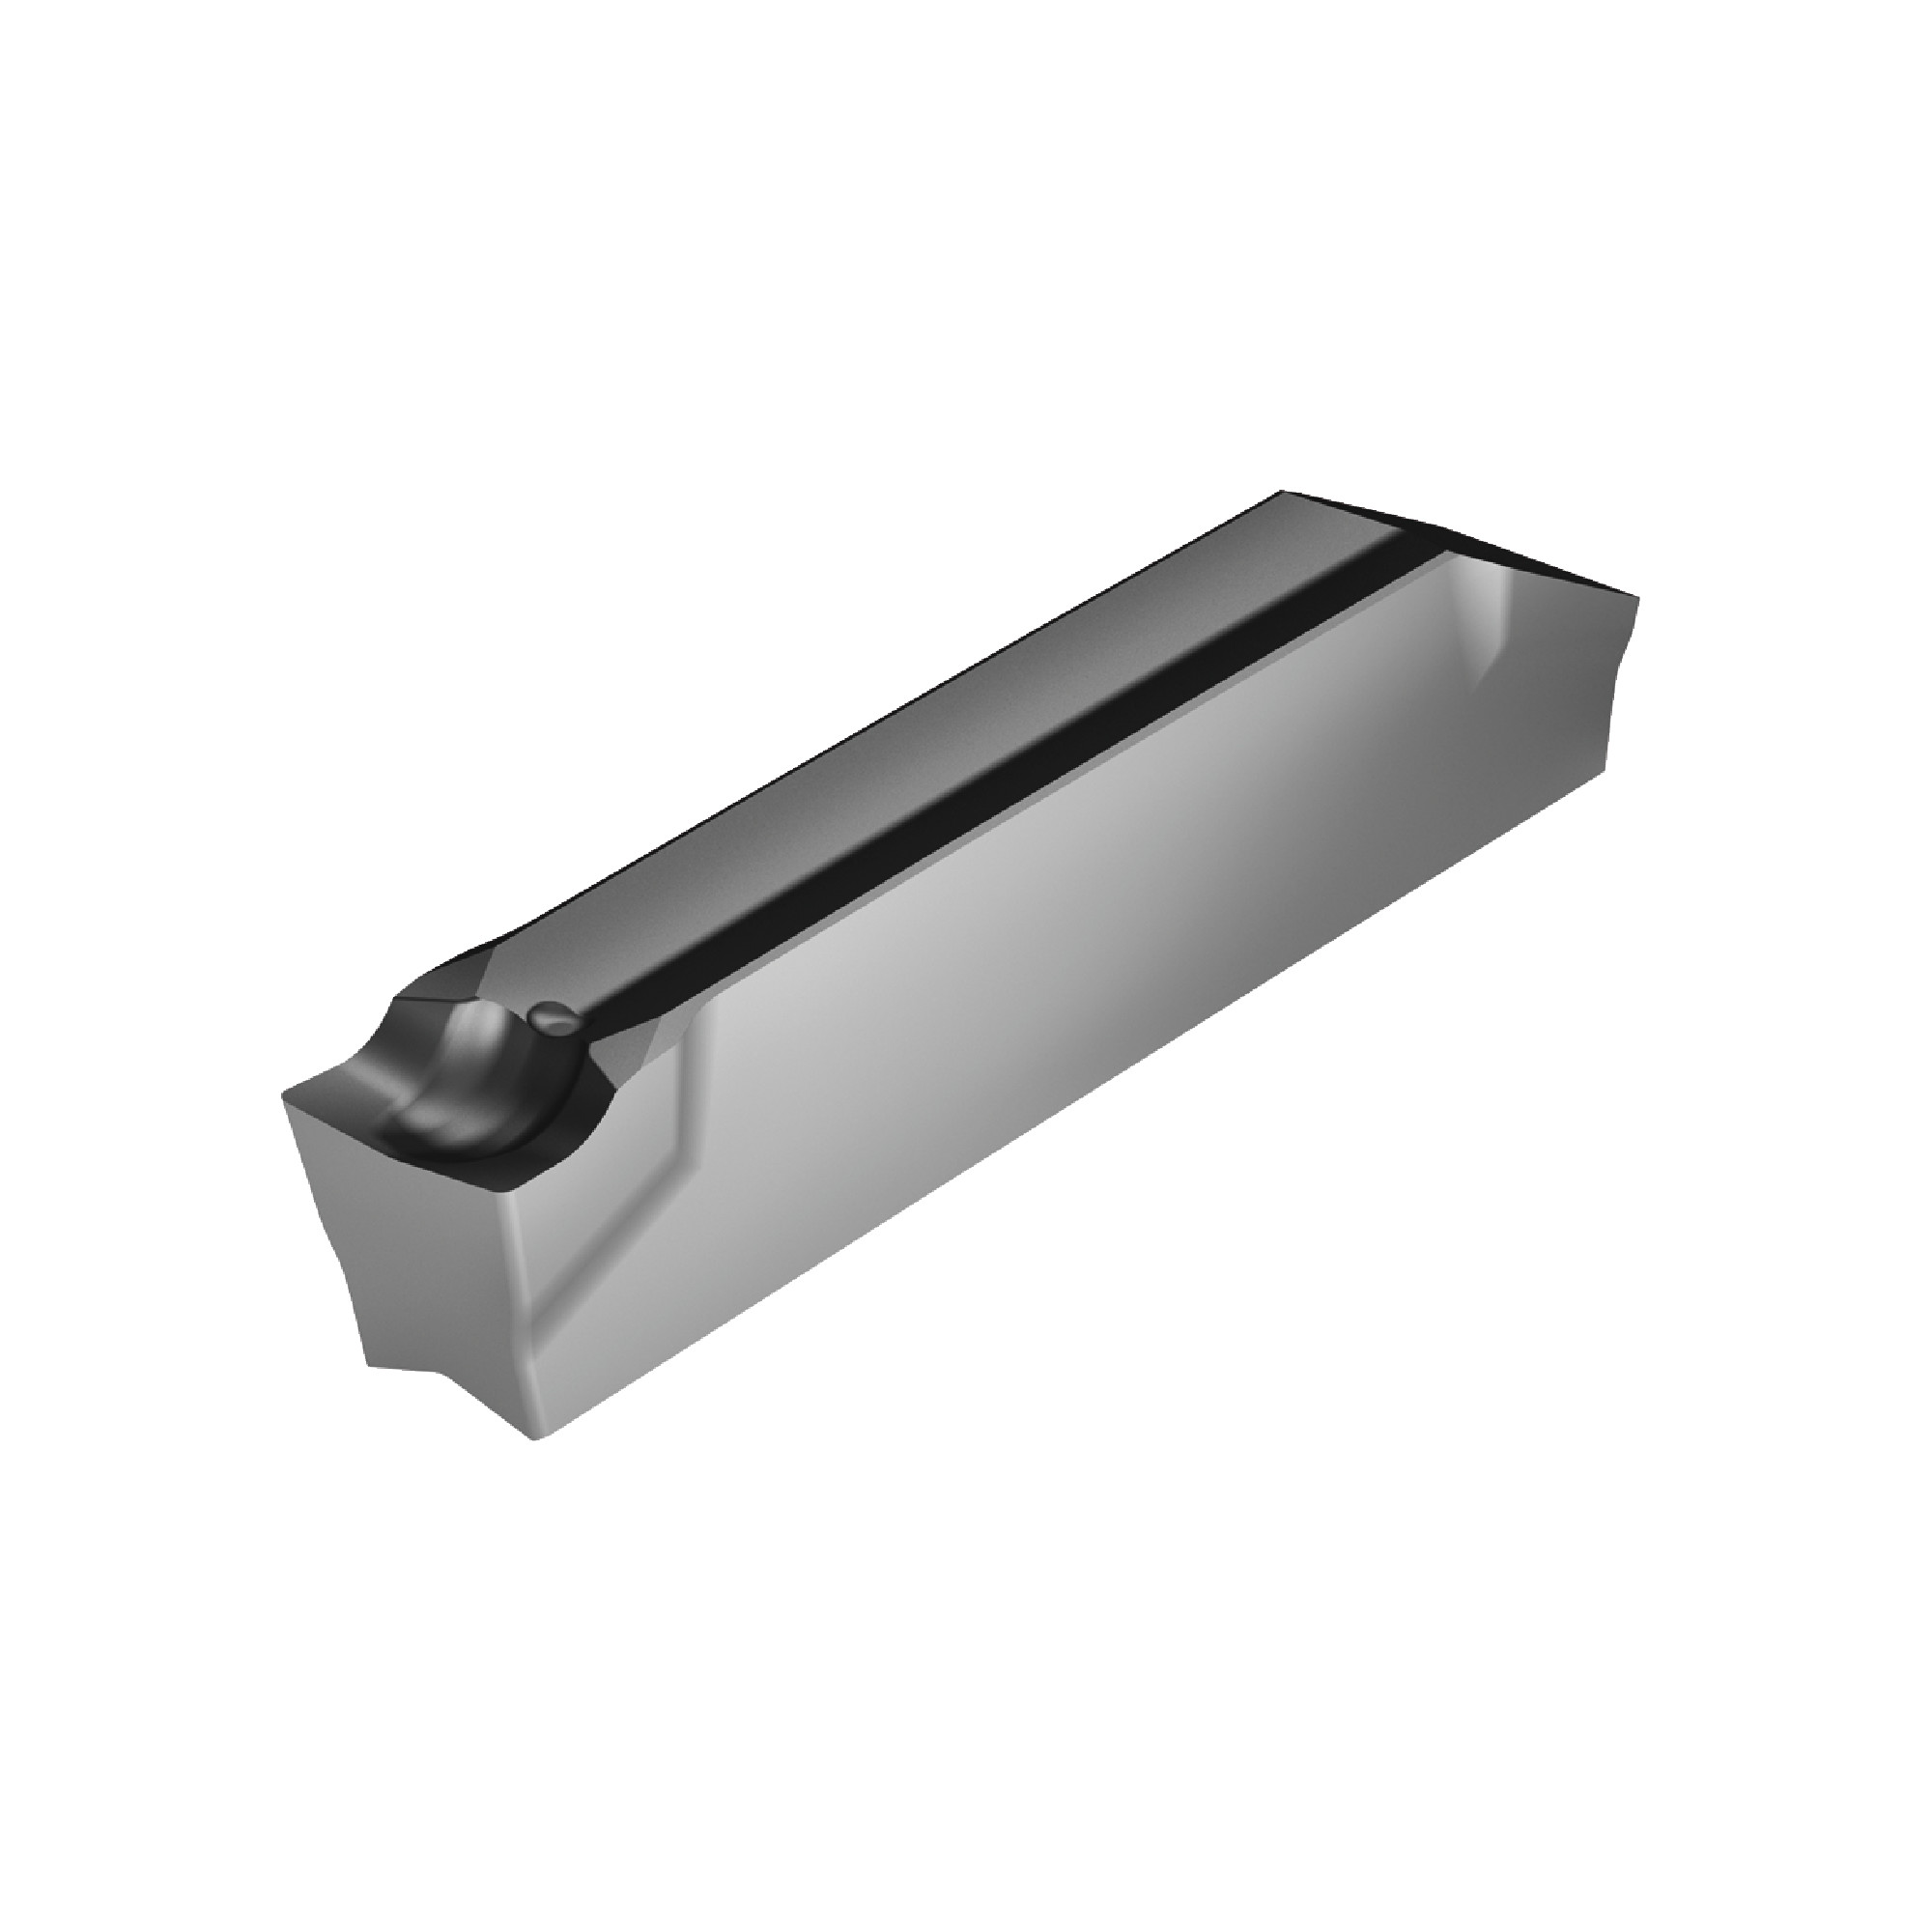 WALTER VALENITE - GX24-2E300N02-CF5 WSM33S / GX - GROOVING Indexable Carbide Insert / 0.118" Cutting Width